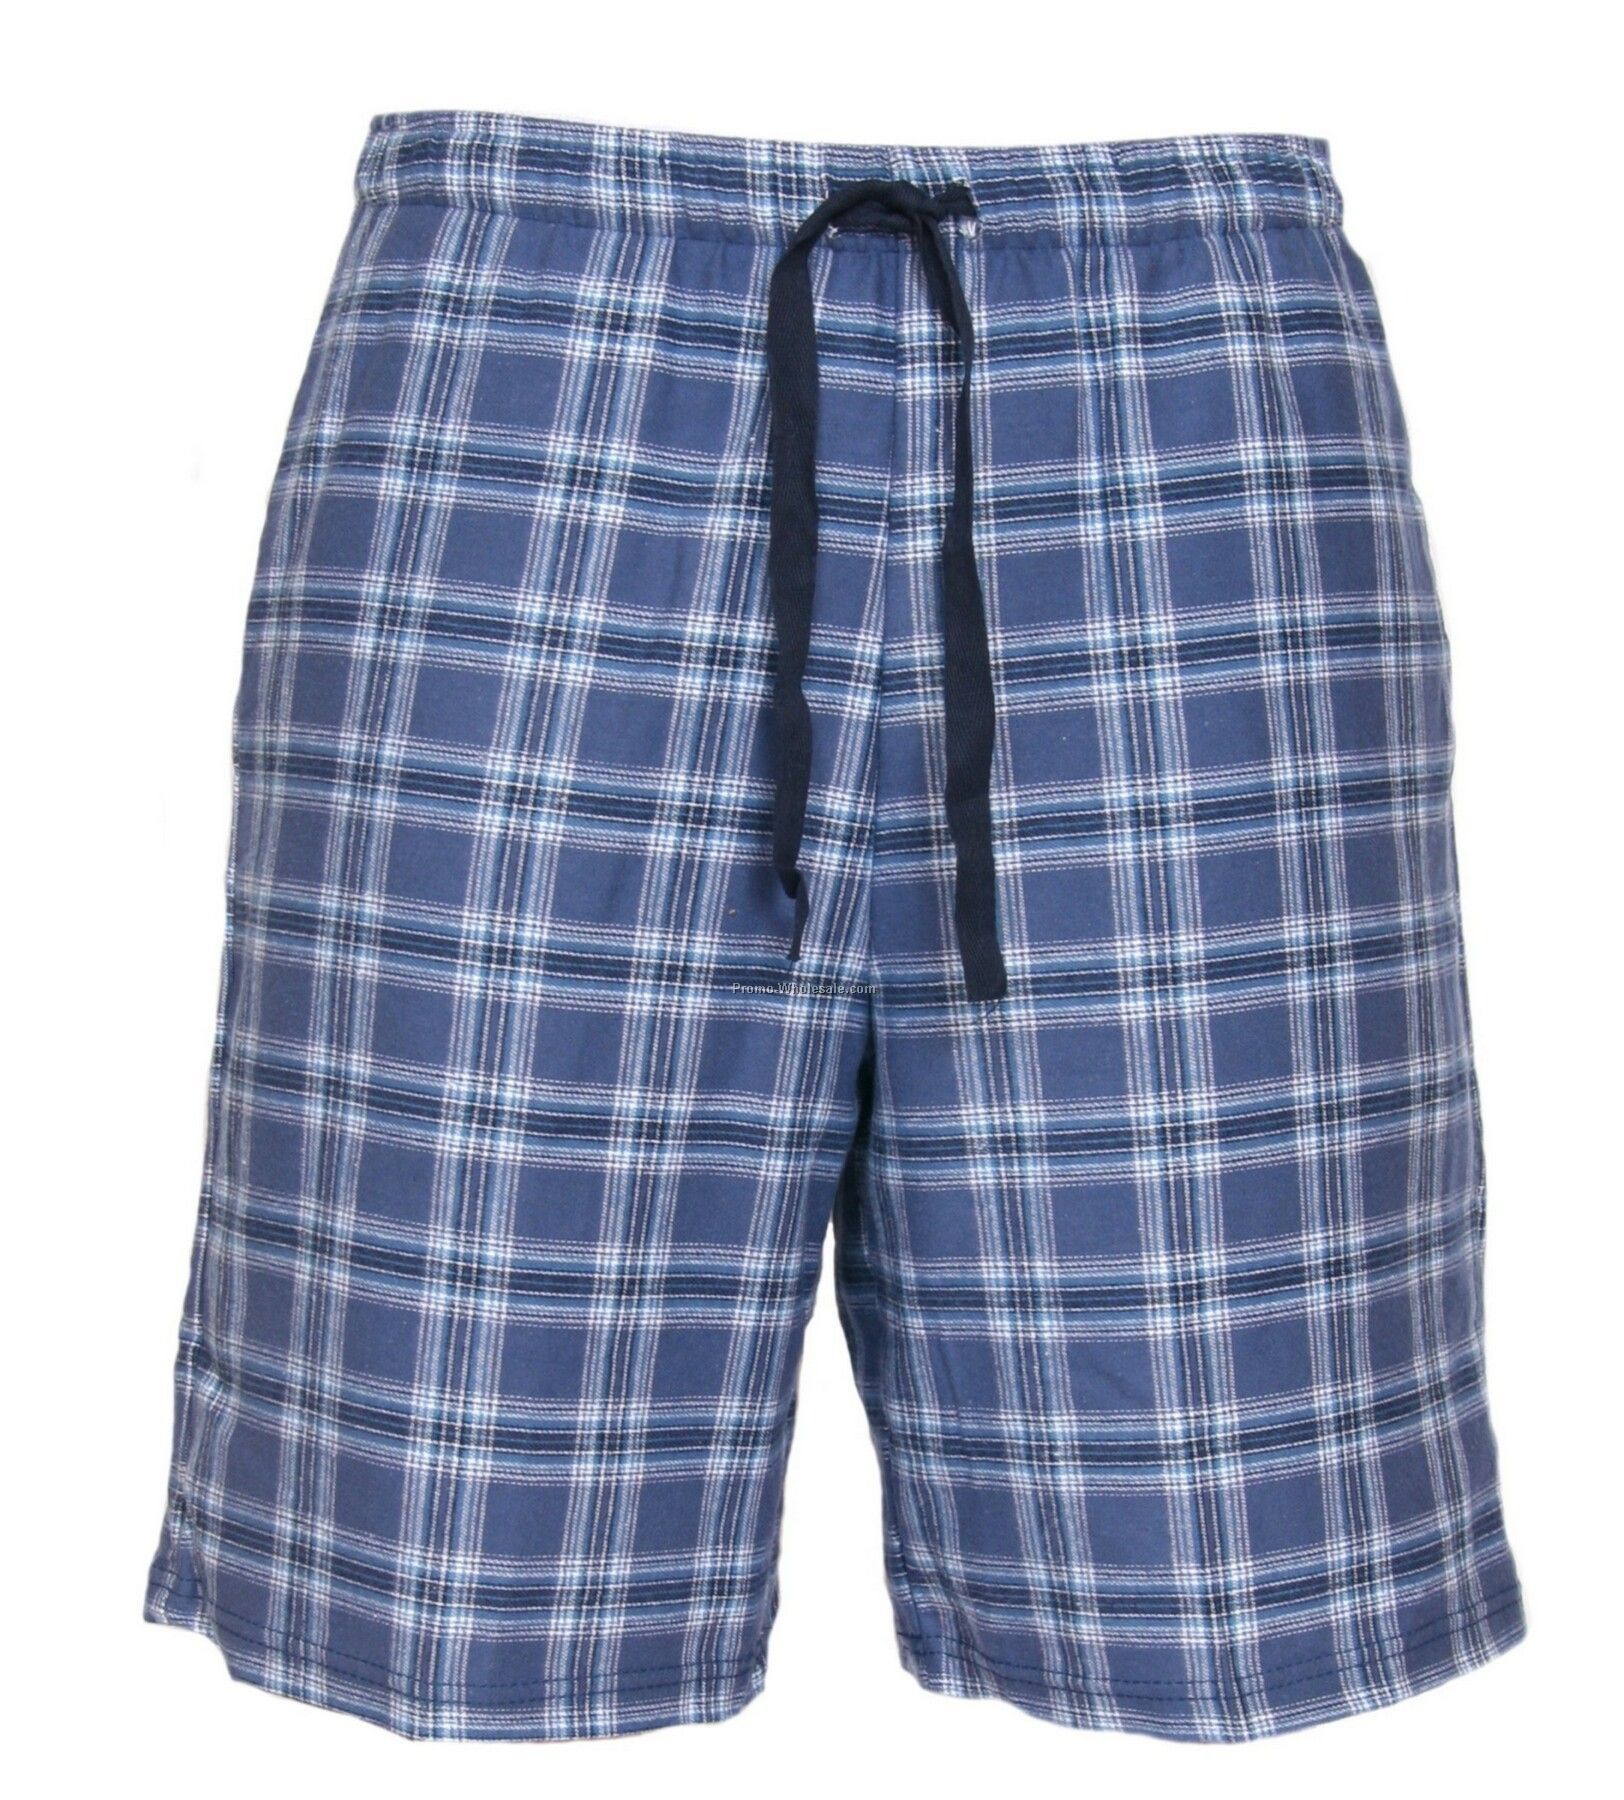 Youths' Royal Blue/ White Flannel Dorm Shorts (Ys-yl)